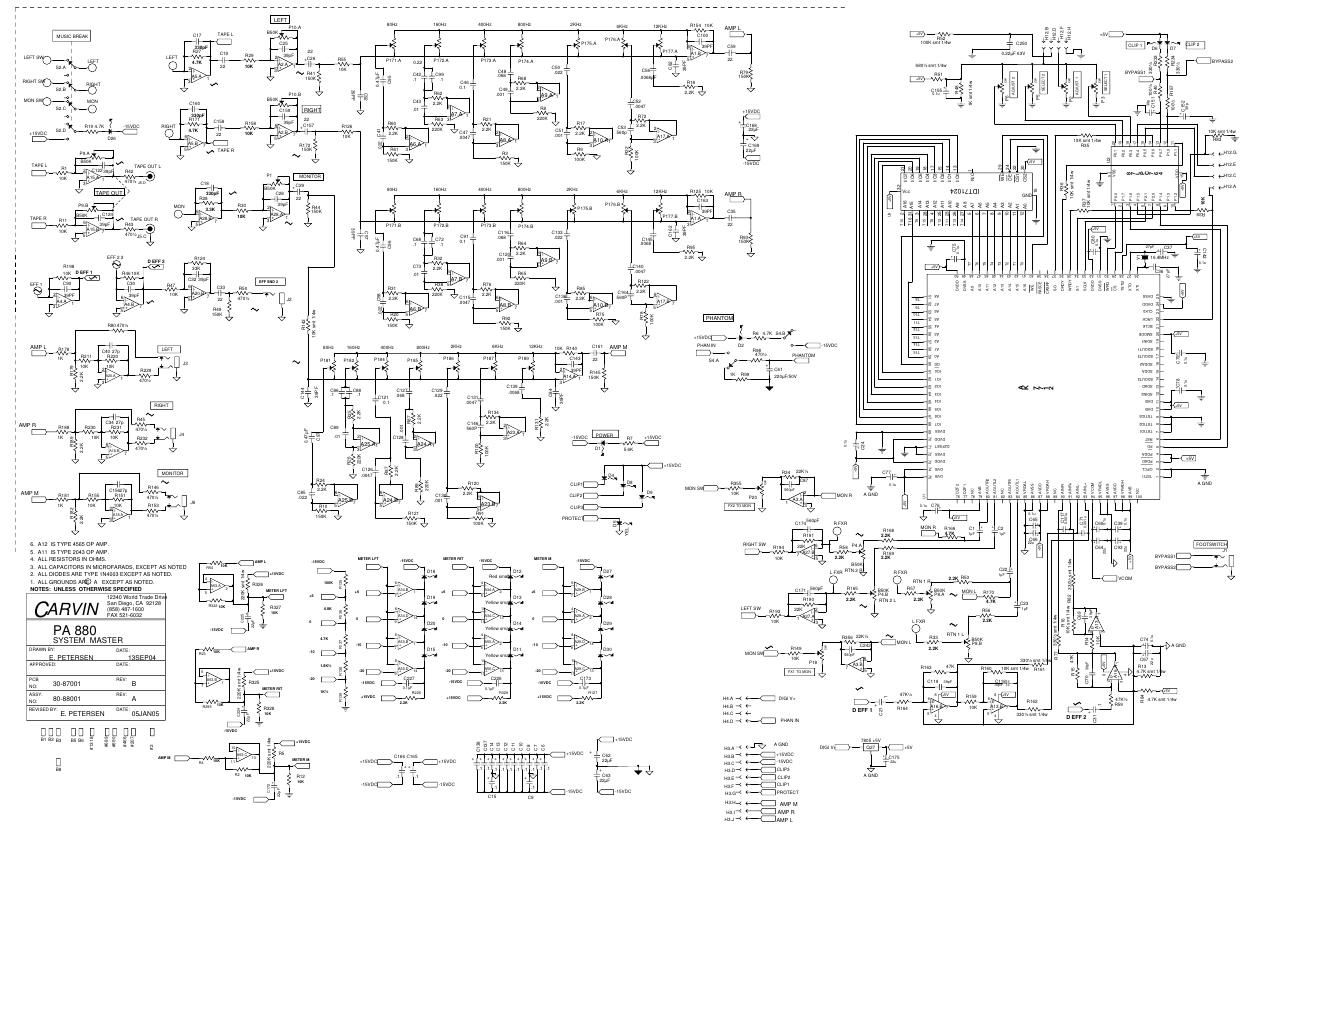 carvin pa 880 system master schematics